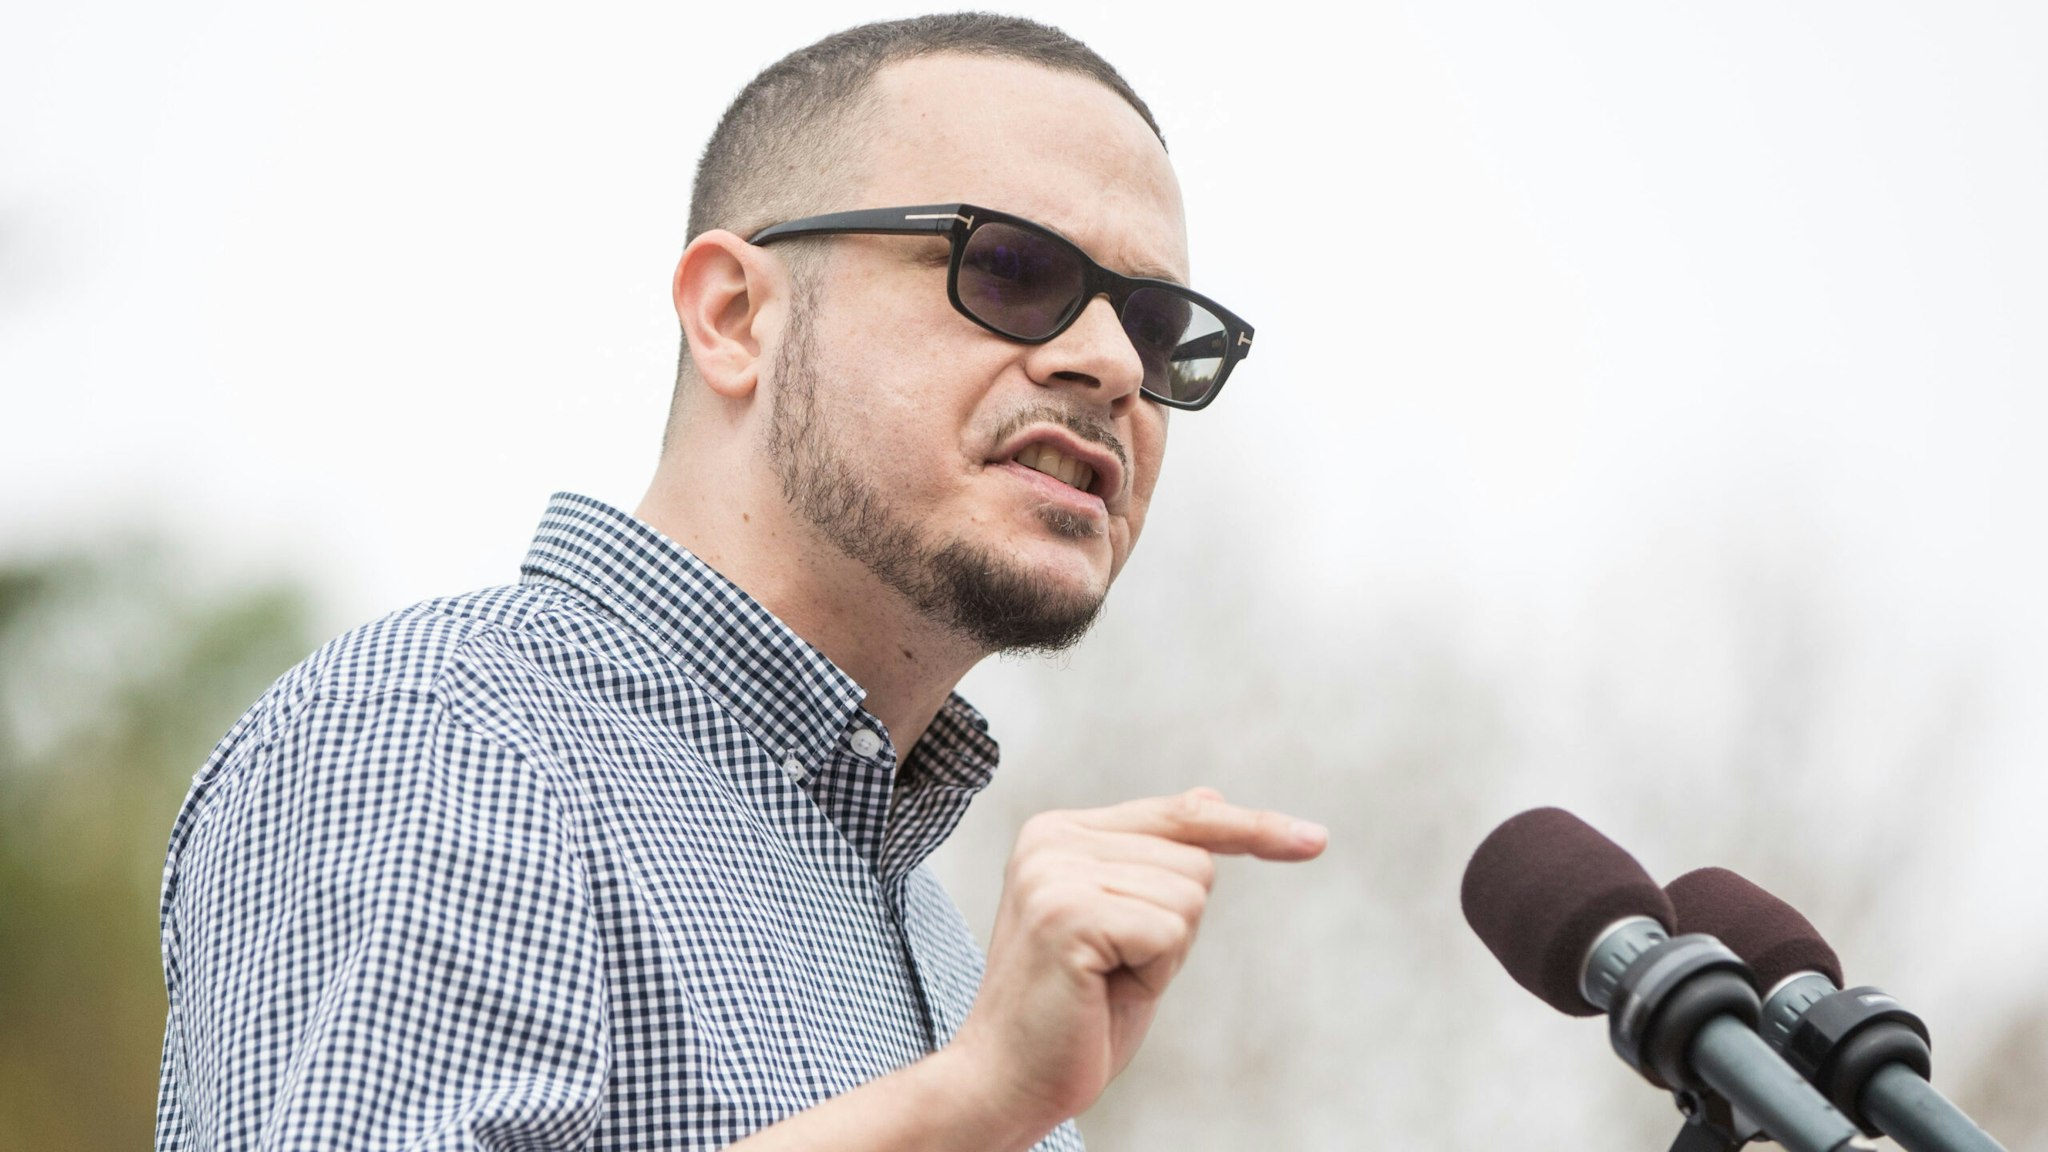 MONTPELIER, VT - MAY 25: Shaun King introduces Democratic presidential candidate Bernie Sanders during a rally in the capital of his home state of Vermont on May 25, 2019 in Montpelier, Vermont. This was the first Vermont rally of Sanders' 2020 campaign.